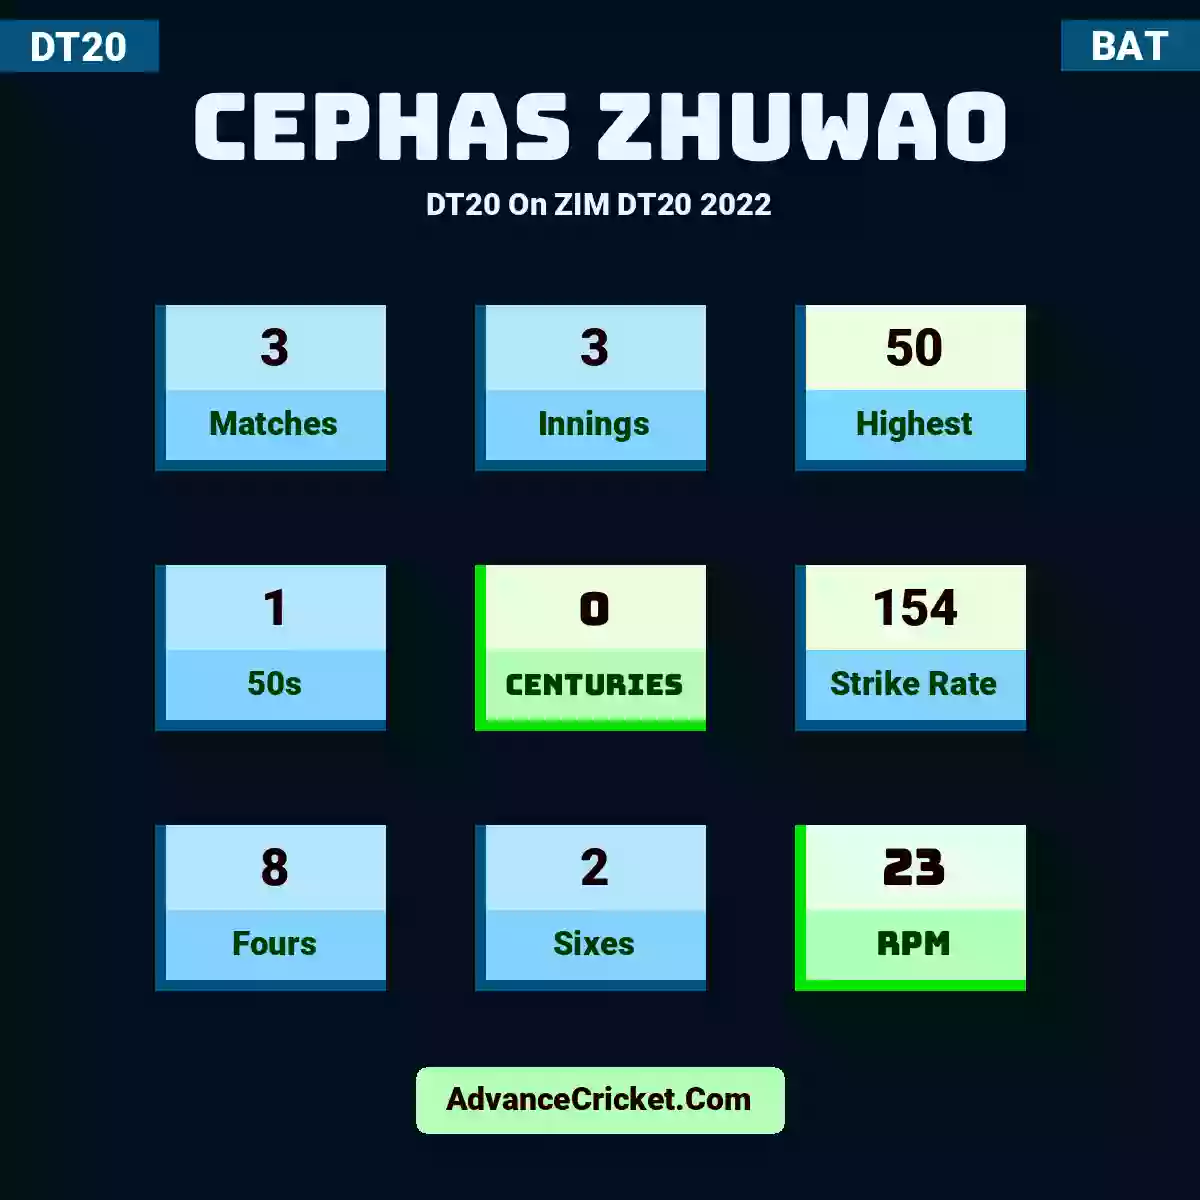 Cephas Zhuwao DT20  On ZIM DT20 2022, Cephas Zhuwao played 3 matches, scored 50 runs as highest, 1 half-centuries, and 0 centuries, with a strike rate of 154. C.Zhuwao hit 8 fours and 2 sixes, with an RPM of 23.